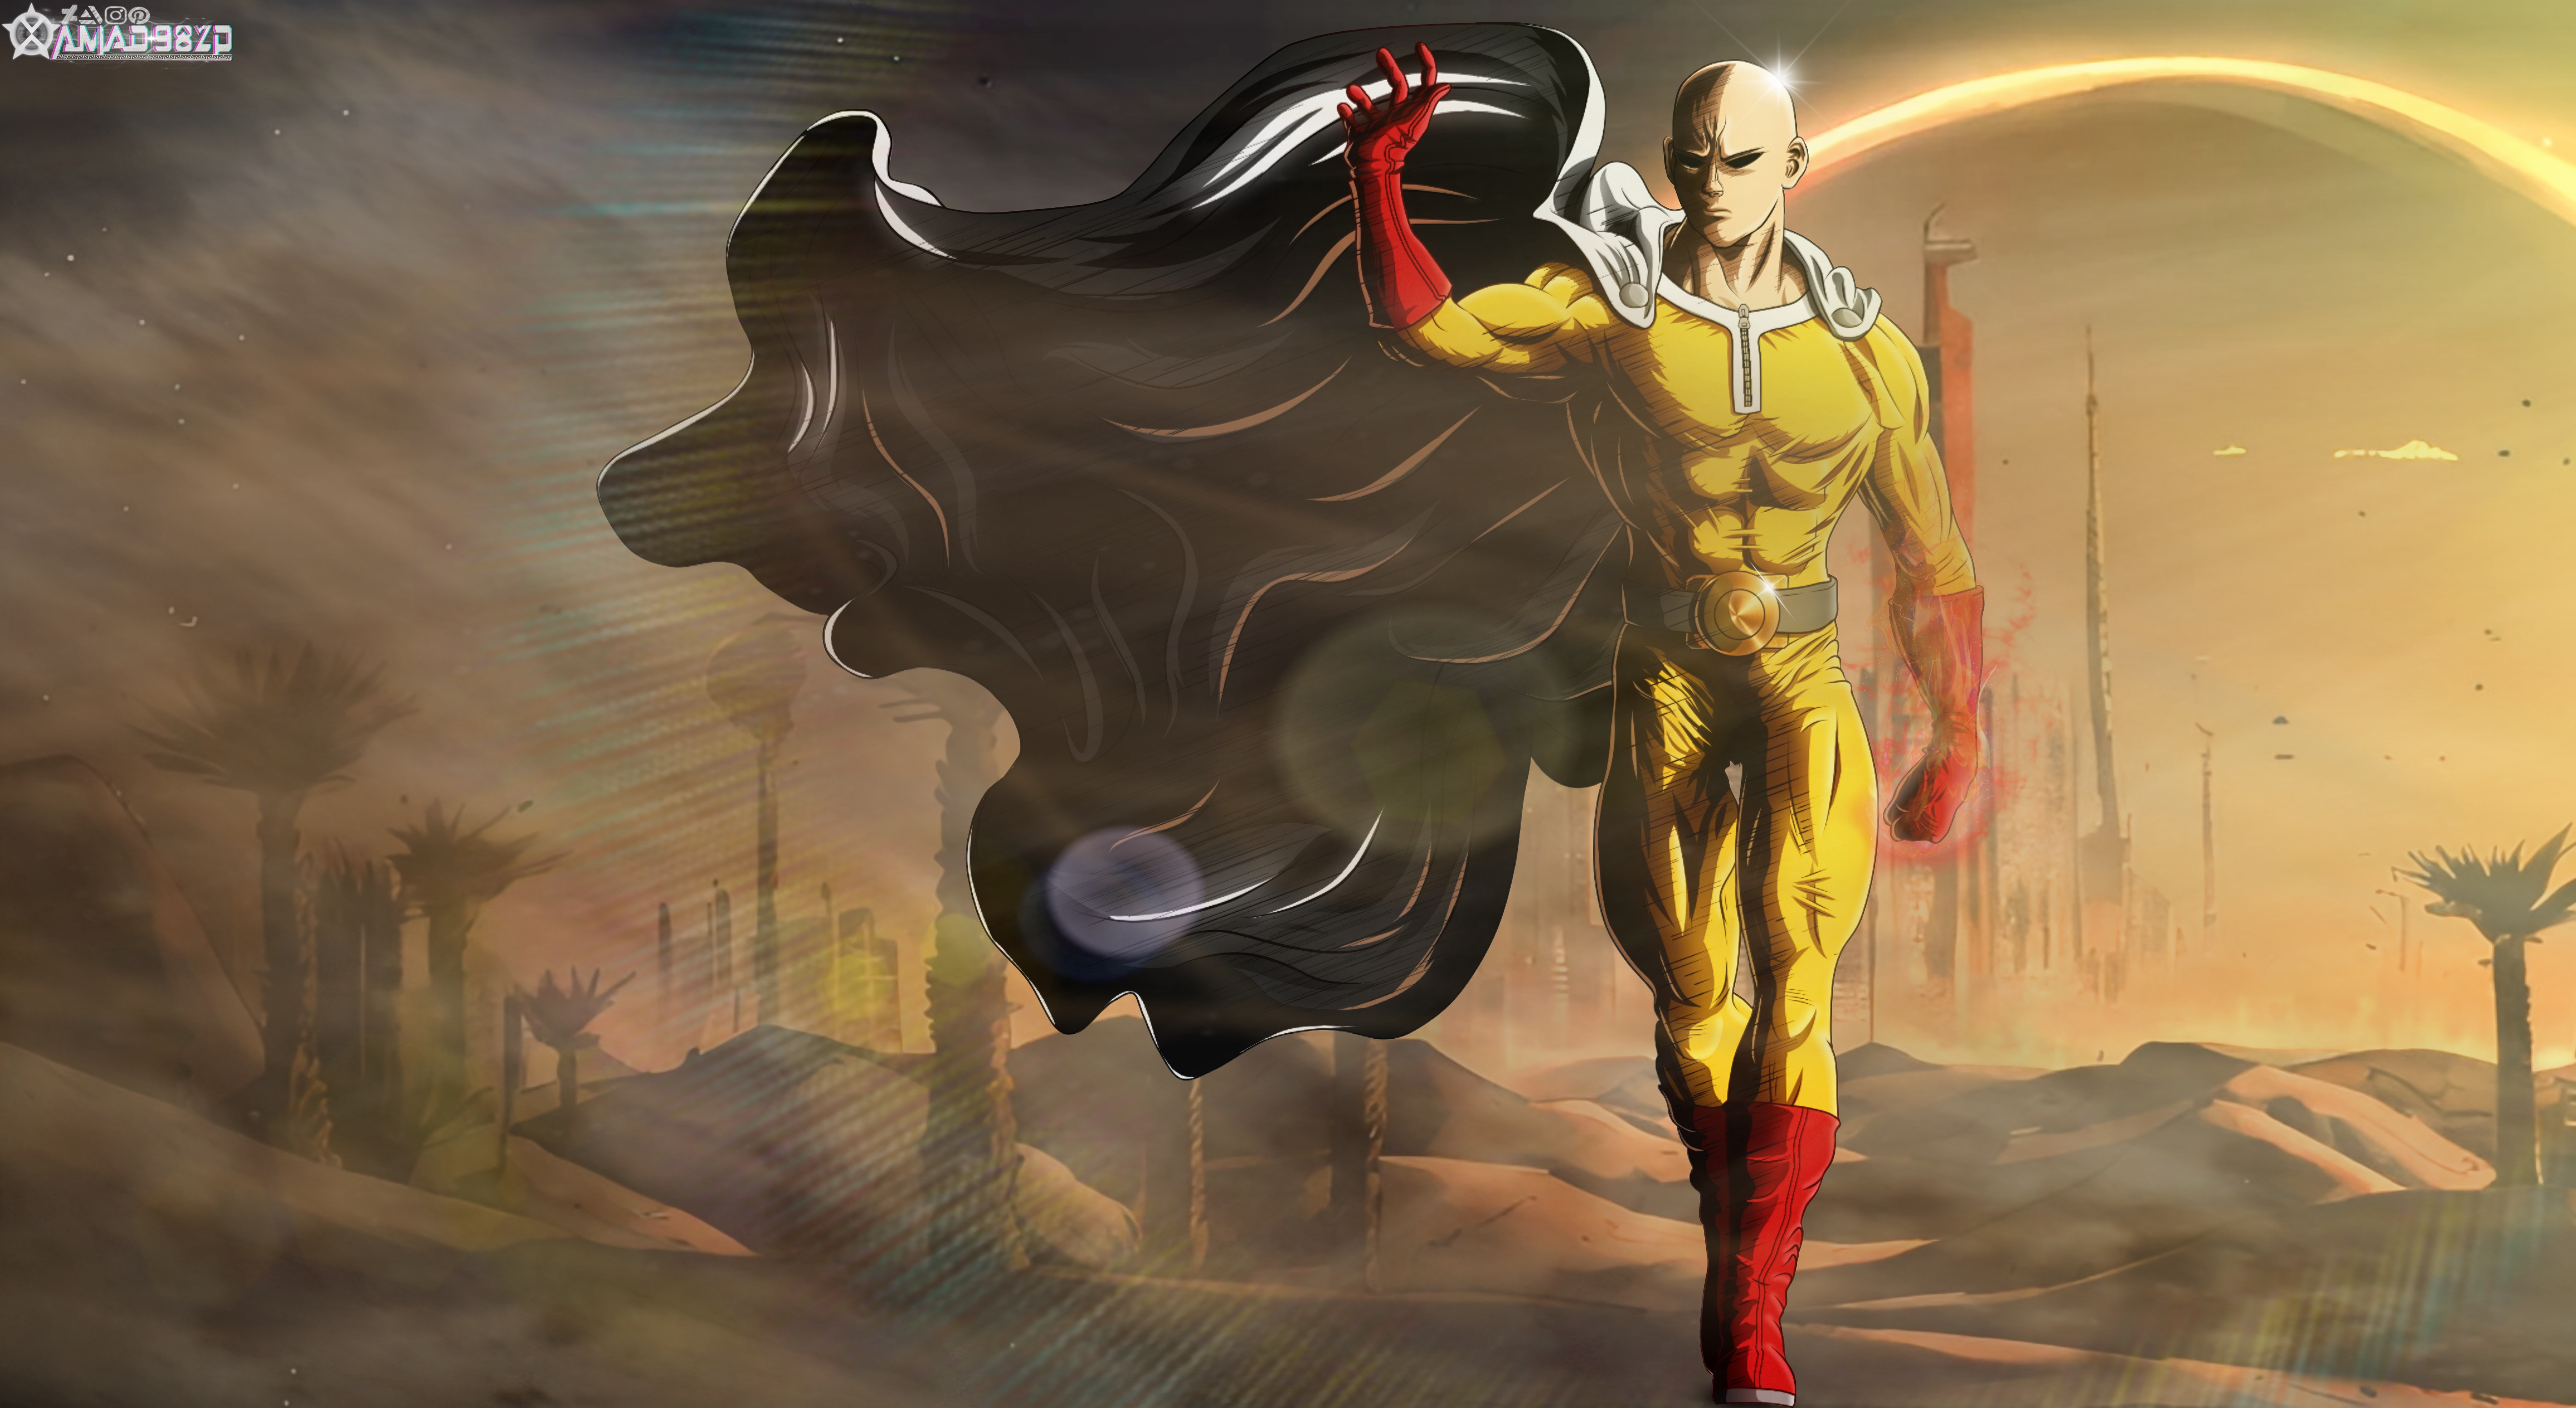 One Saitama Punch Wallpaper man - OPM BackGround for Android - Download